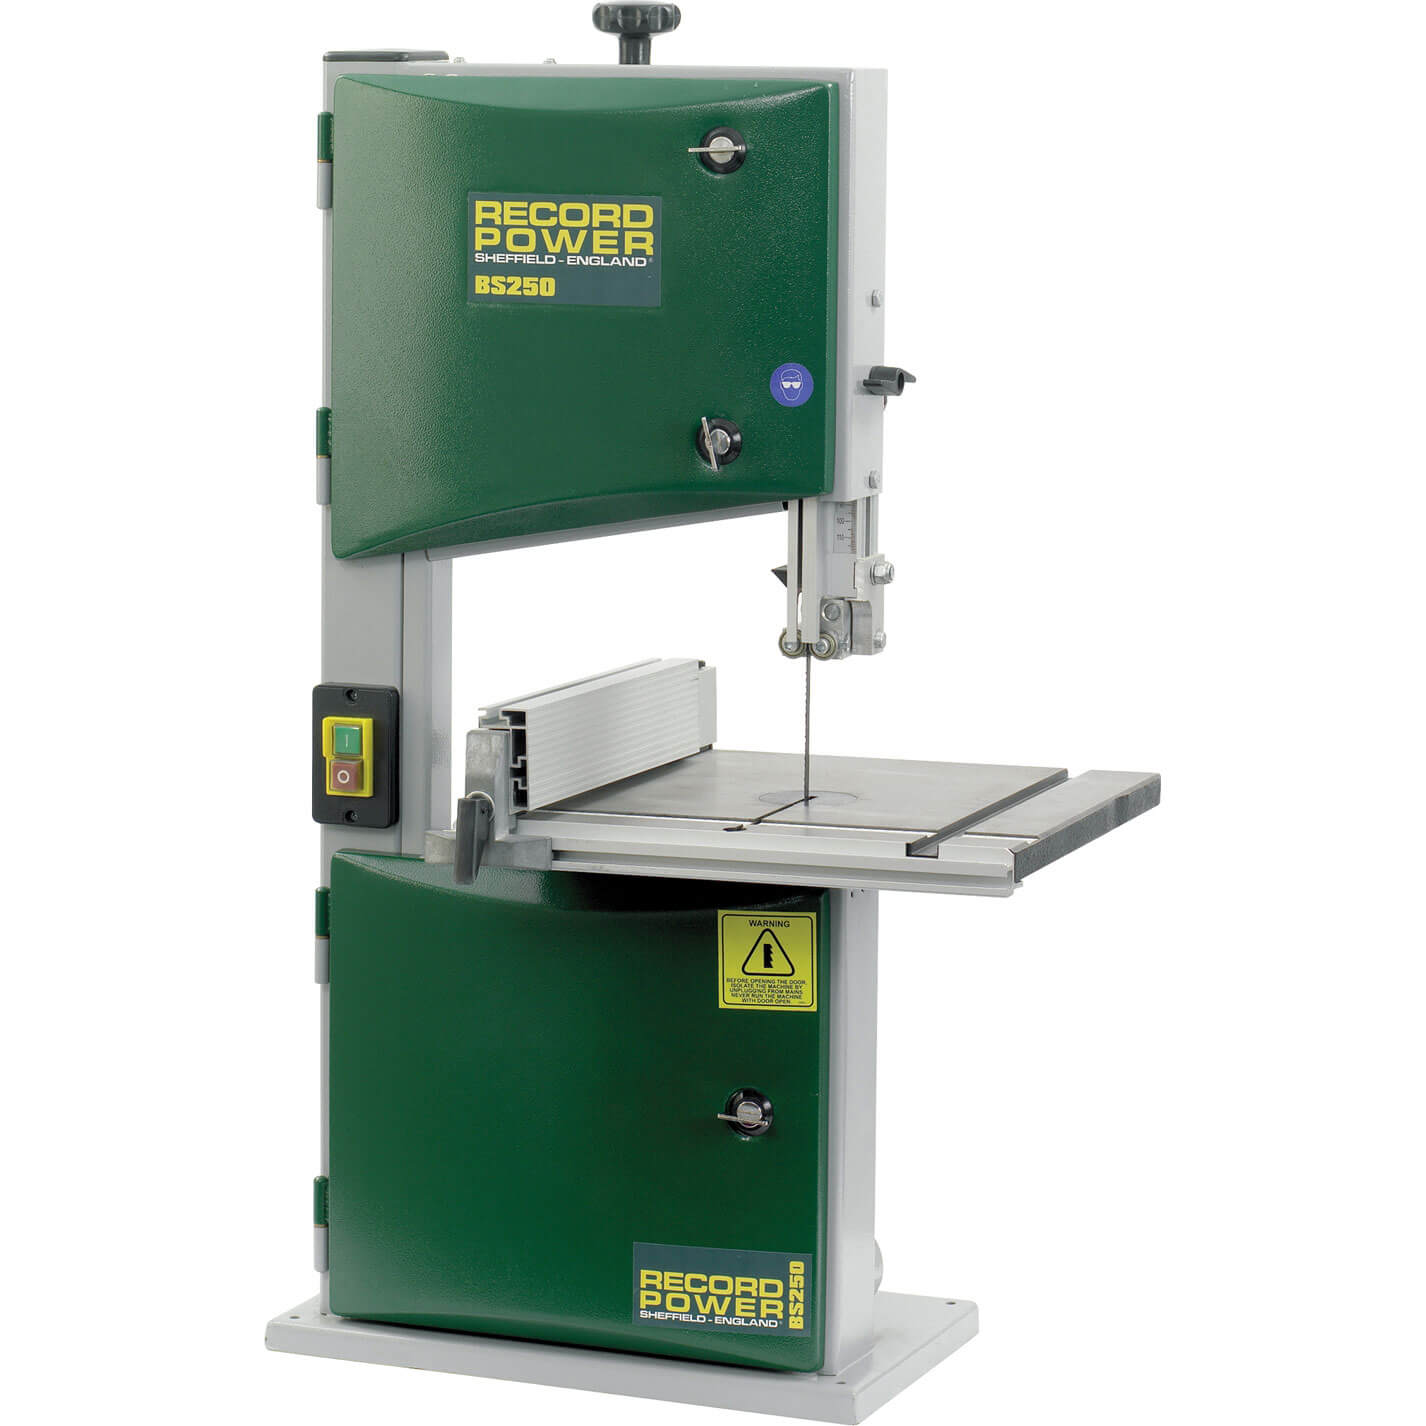 Image of Record Power BS250 Compact Bandsaw 240v